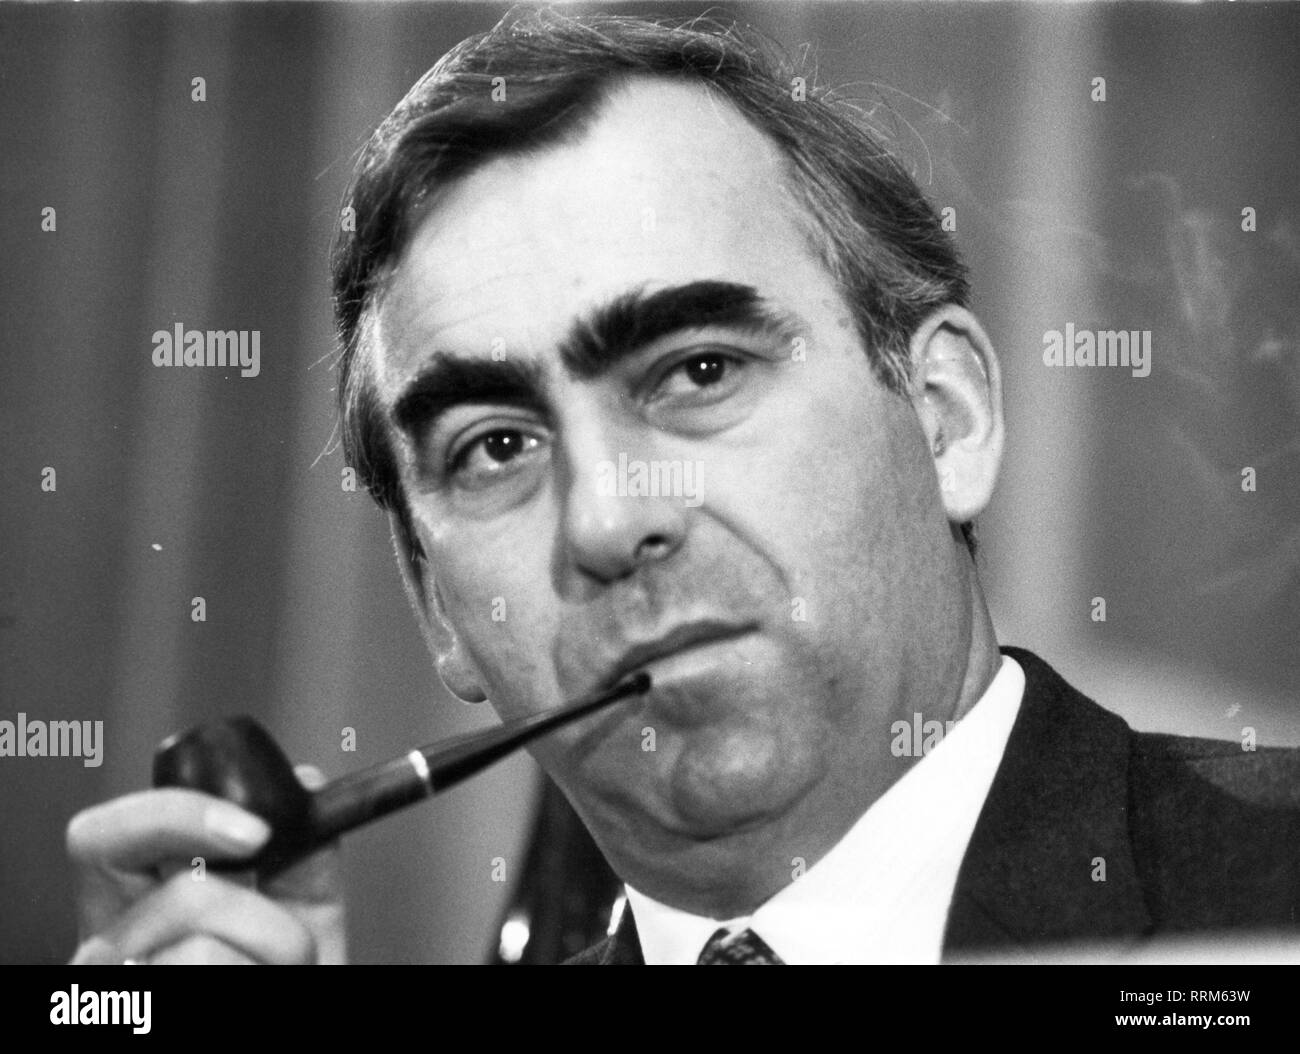 Waigel, Theodor 'Theo', * 22.4.1939, German politician (Christian Social Union), portrait, Christian Social Union party congress, Munich, October 1984, Additional-Rights-Clearance-Info-Not-Available Stock Photo